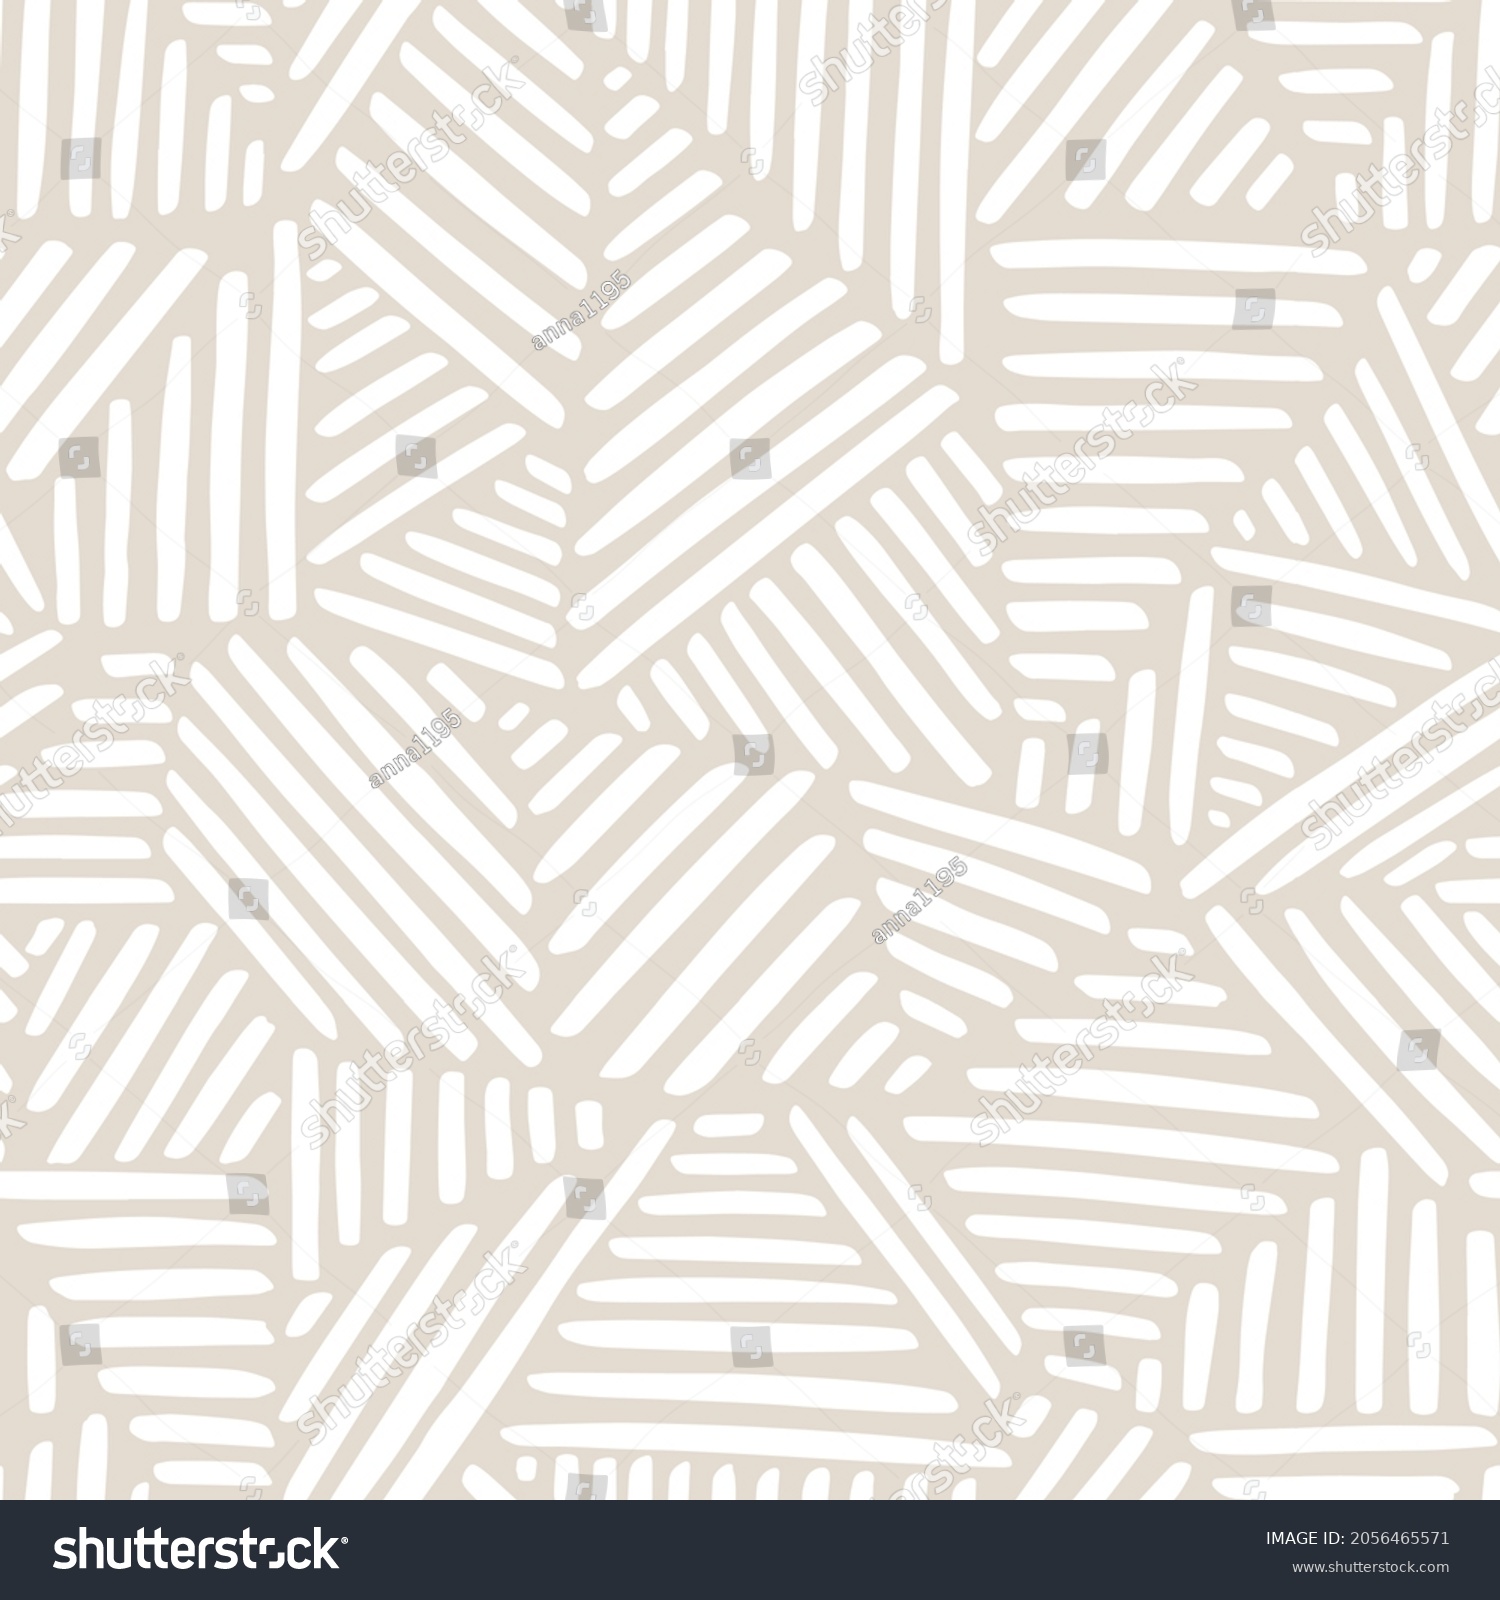 Aesthetic Contemporary Printable Seamless Pattern Abstract Stock Vector ...